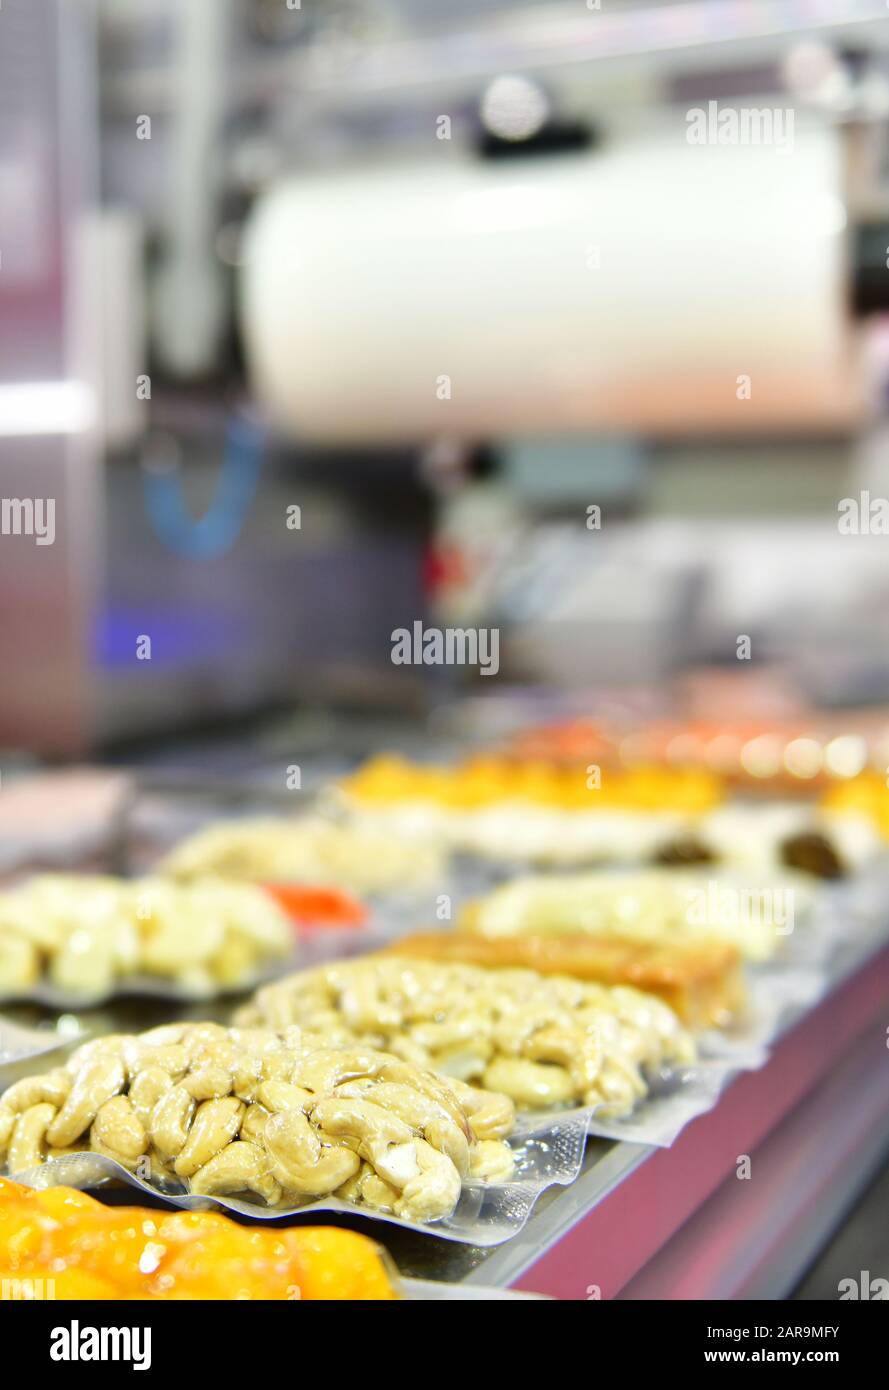 Automatic Bean food production line on conveyor belt equipment machinery in factory, industrial food production. Stock Photo